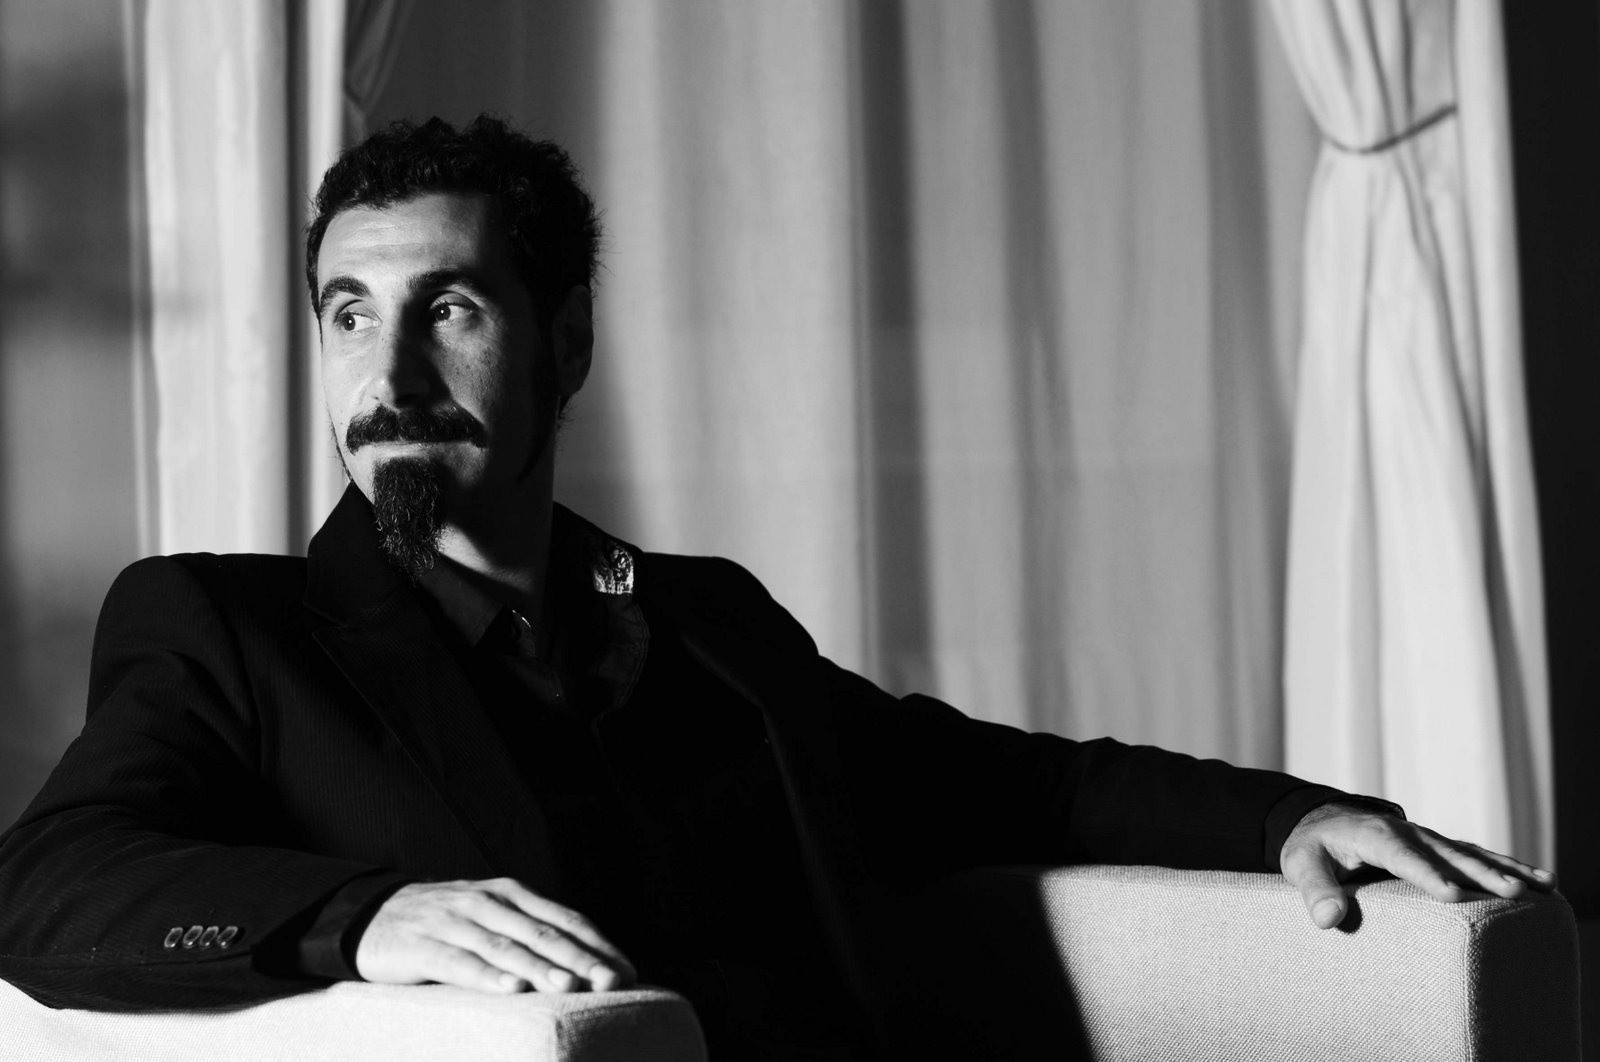 People 1600x1062 men musician monochrome singer sitting System of a Down beard suits looking away curtains music